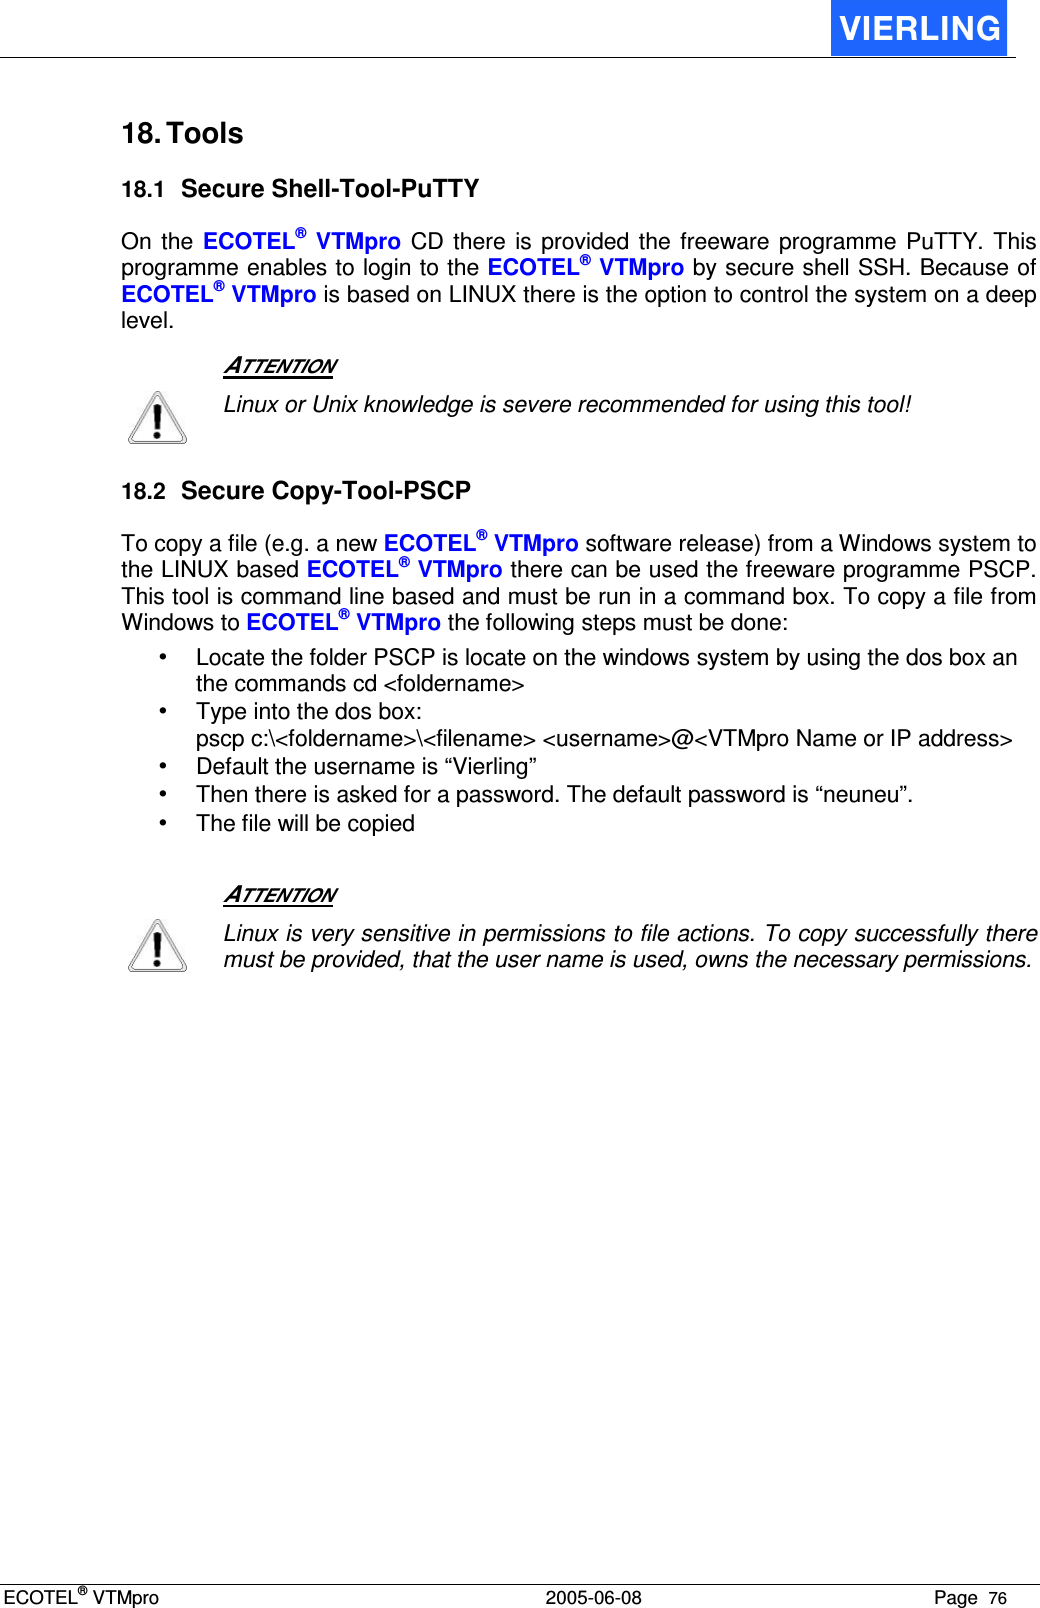 ECOTEL® VTMpro  2005-06-08 Page  76    18. Tools 18.1 Secure Shell-Tool-PuTTY On  the  ECOTEL®  VTMpro CD  there  is provided  the freeware  programme PuTTY.  This programme enables to login to the ECOTEL® VTMpro by secure shell SSH. Because of ECOTEL® VTMpro is based on LINUX there is the option to control the system on a deep level.    ATTENTION  Linux or Unix knowledge is severe recommended for using this tool! 18.2 Secure Copy-Tool-PSCP To copy a file (e.g. a new ECOTEL® VTMpro software release) from a Windows system to the LINUX based ECOTEL® VTMpro there can be used the freeware programme PSCP. This tool is command line based and must be run in a command box. To copy a file from Windows to ECOTEL® VTMpro the following steps must be done: • Locate the folder PSCP is locate on the windows system by using the dos box an the commands cd &lt;foldername&gt; • Type into the dos box:  pscp c:\&lt;foldername&gt;\&lt;filename&gt; &lt;username&gt;@&lt;VTMpro Name or IP address&gt; • Default the username is “Vierling” • Then there is asked for a password. The default password is “neuneu”. • The file will be copied    ATTENTION  Linux is very sensitive in permissions to file actions. To copy successfully there must be provided, that the user name is used, owns the necessary permissions.  